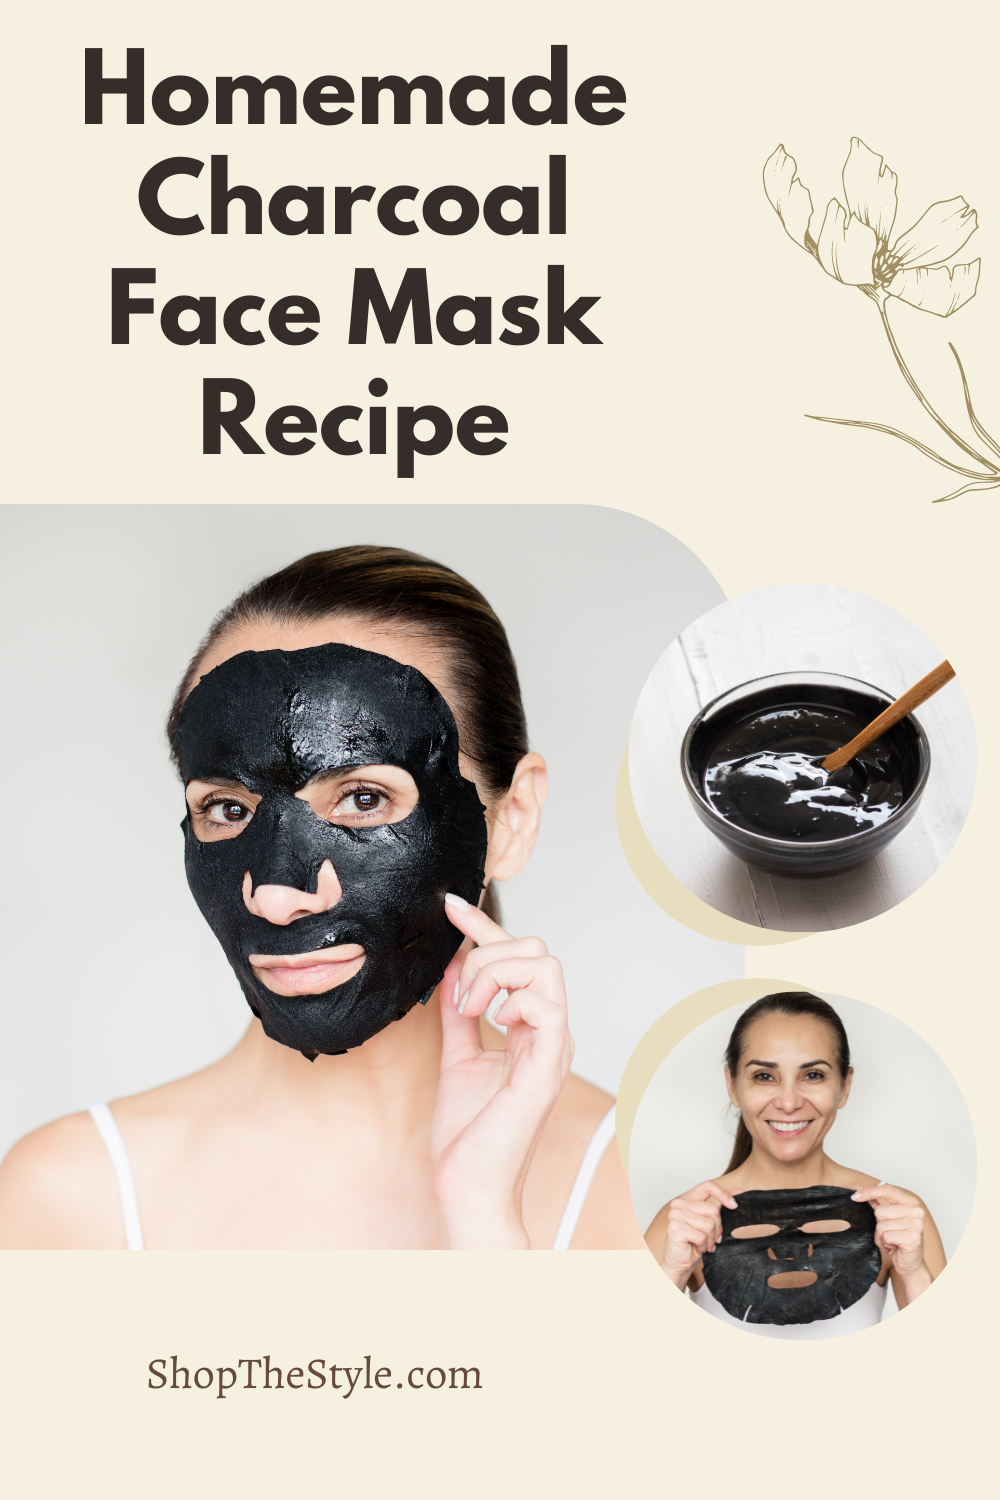 Homemade Charcoal Face Mask Recipe